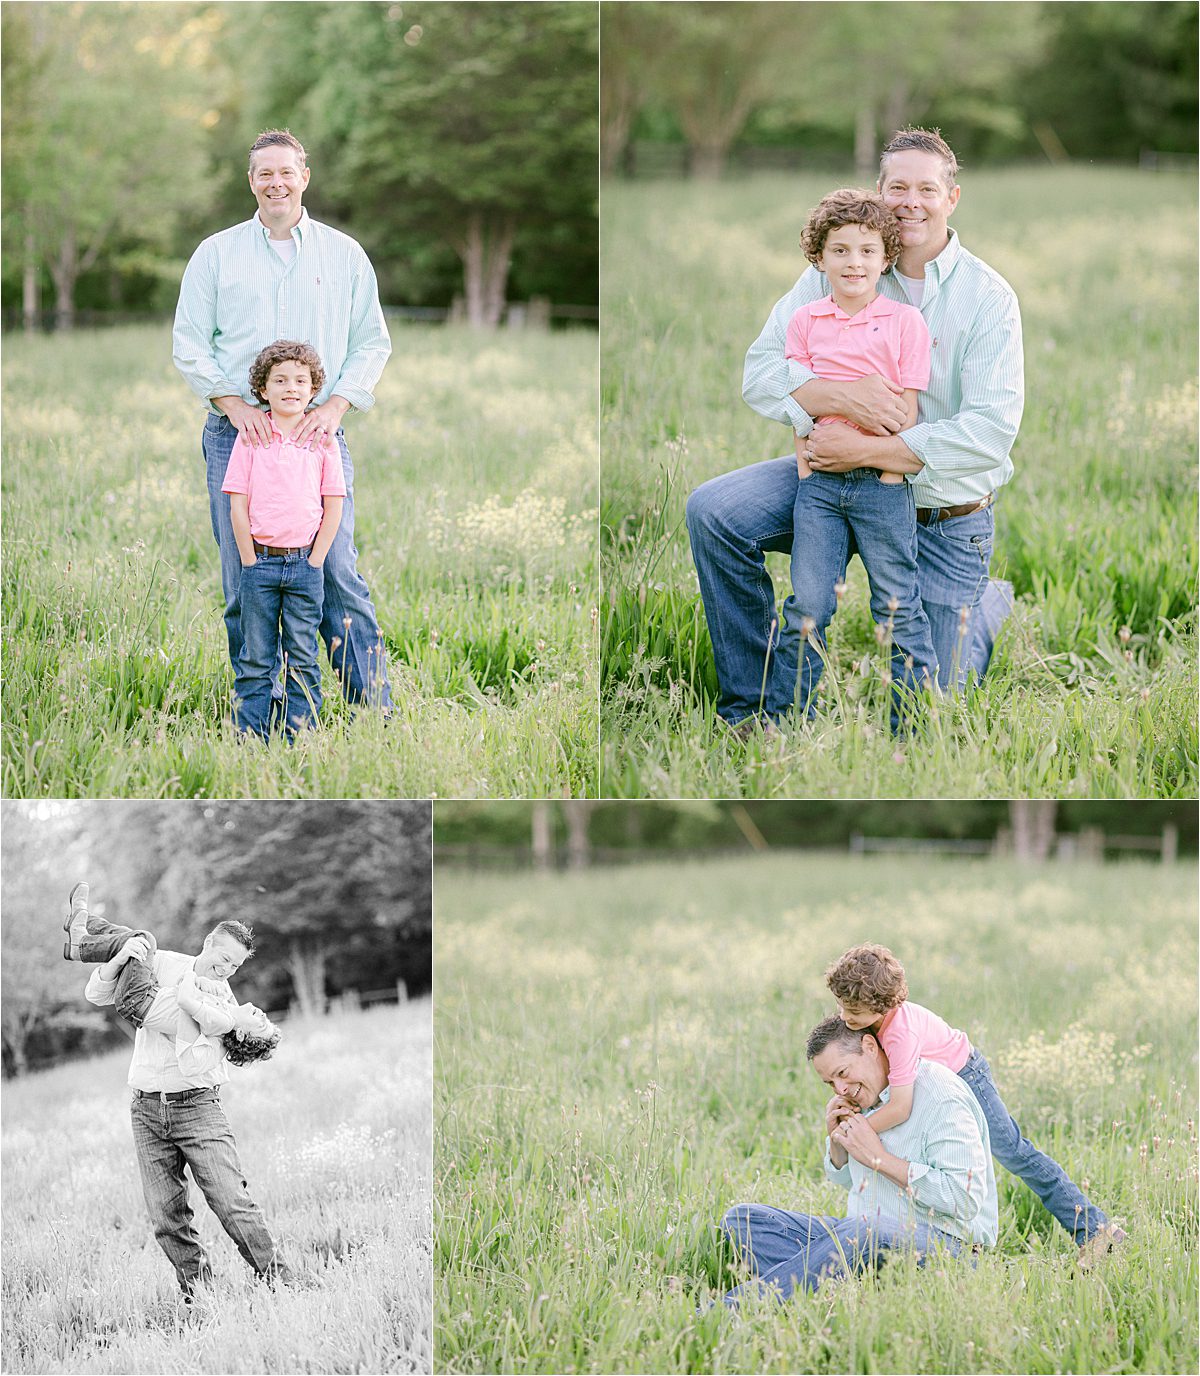 Athens, GA spring family pictures in a field with wildflowers of father and son.